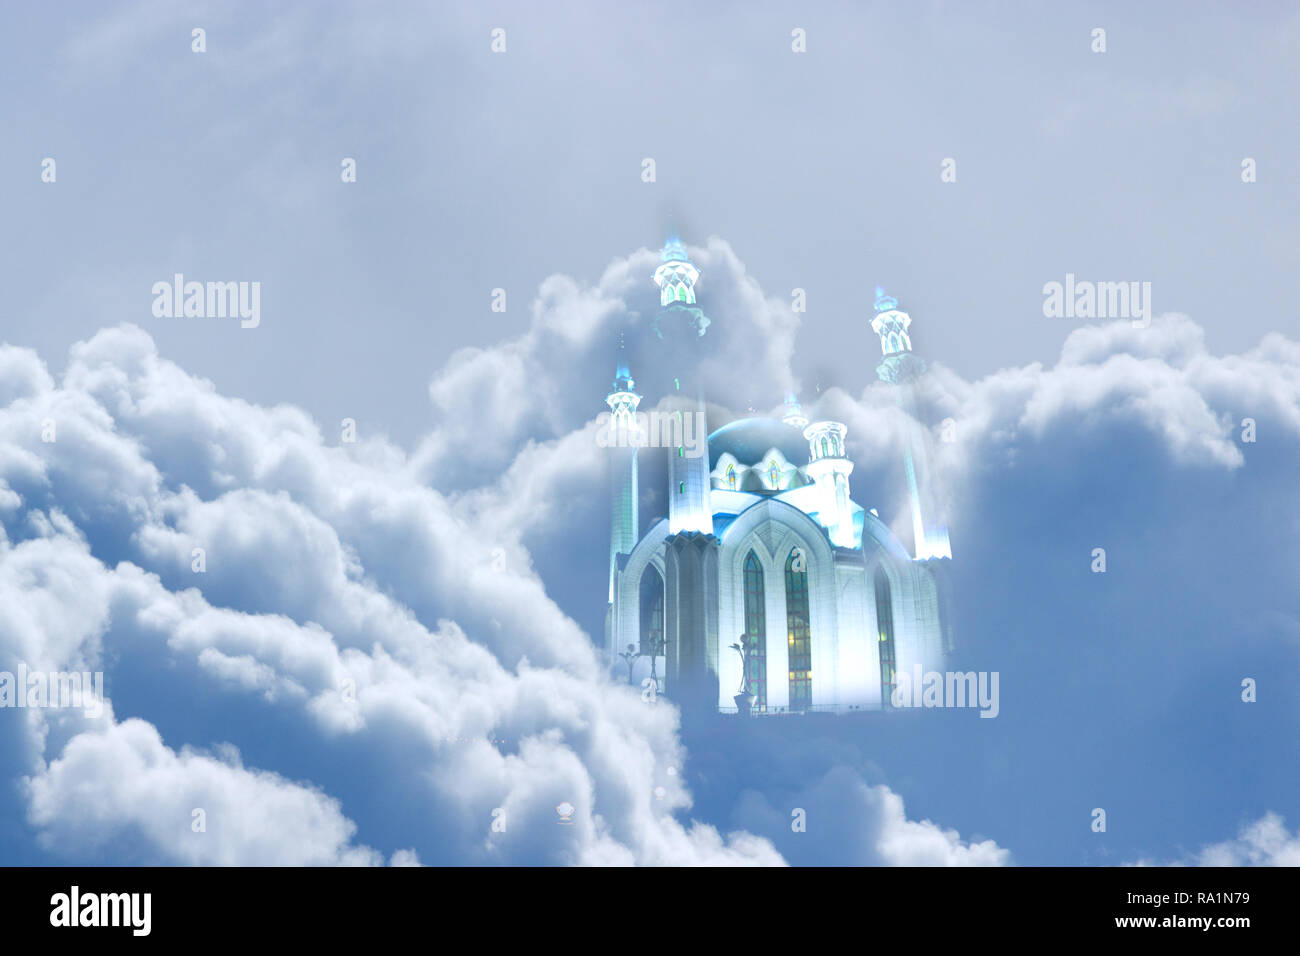 holy Islamic mosque in heaven. conceptual image Stock Photo